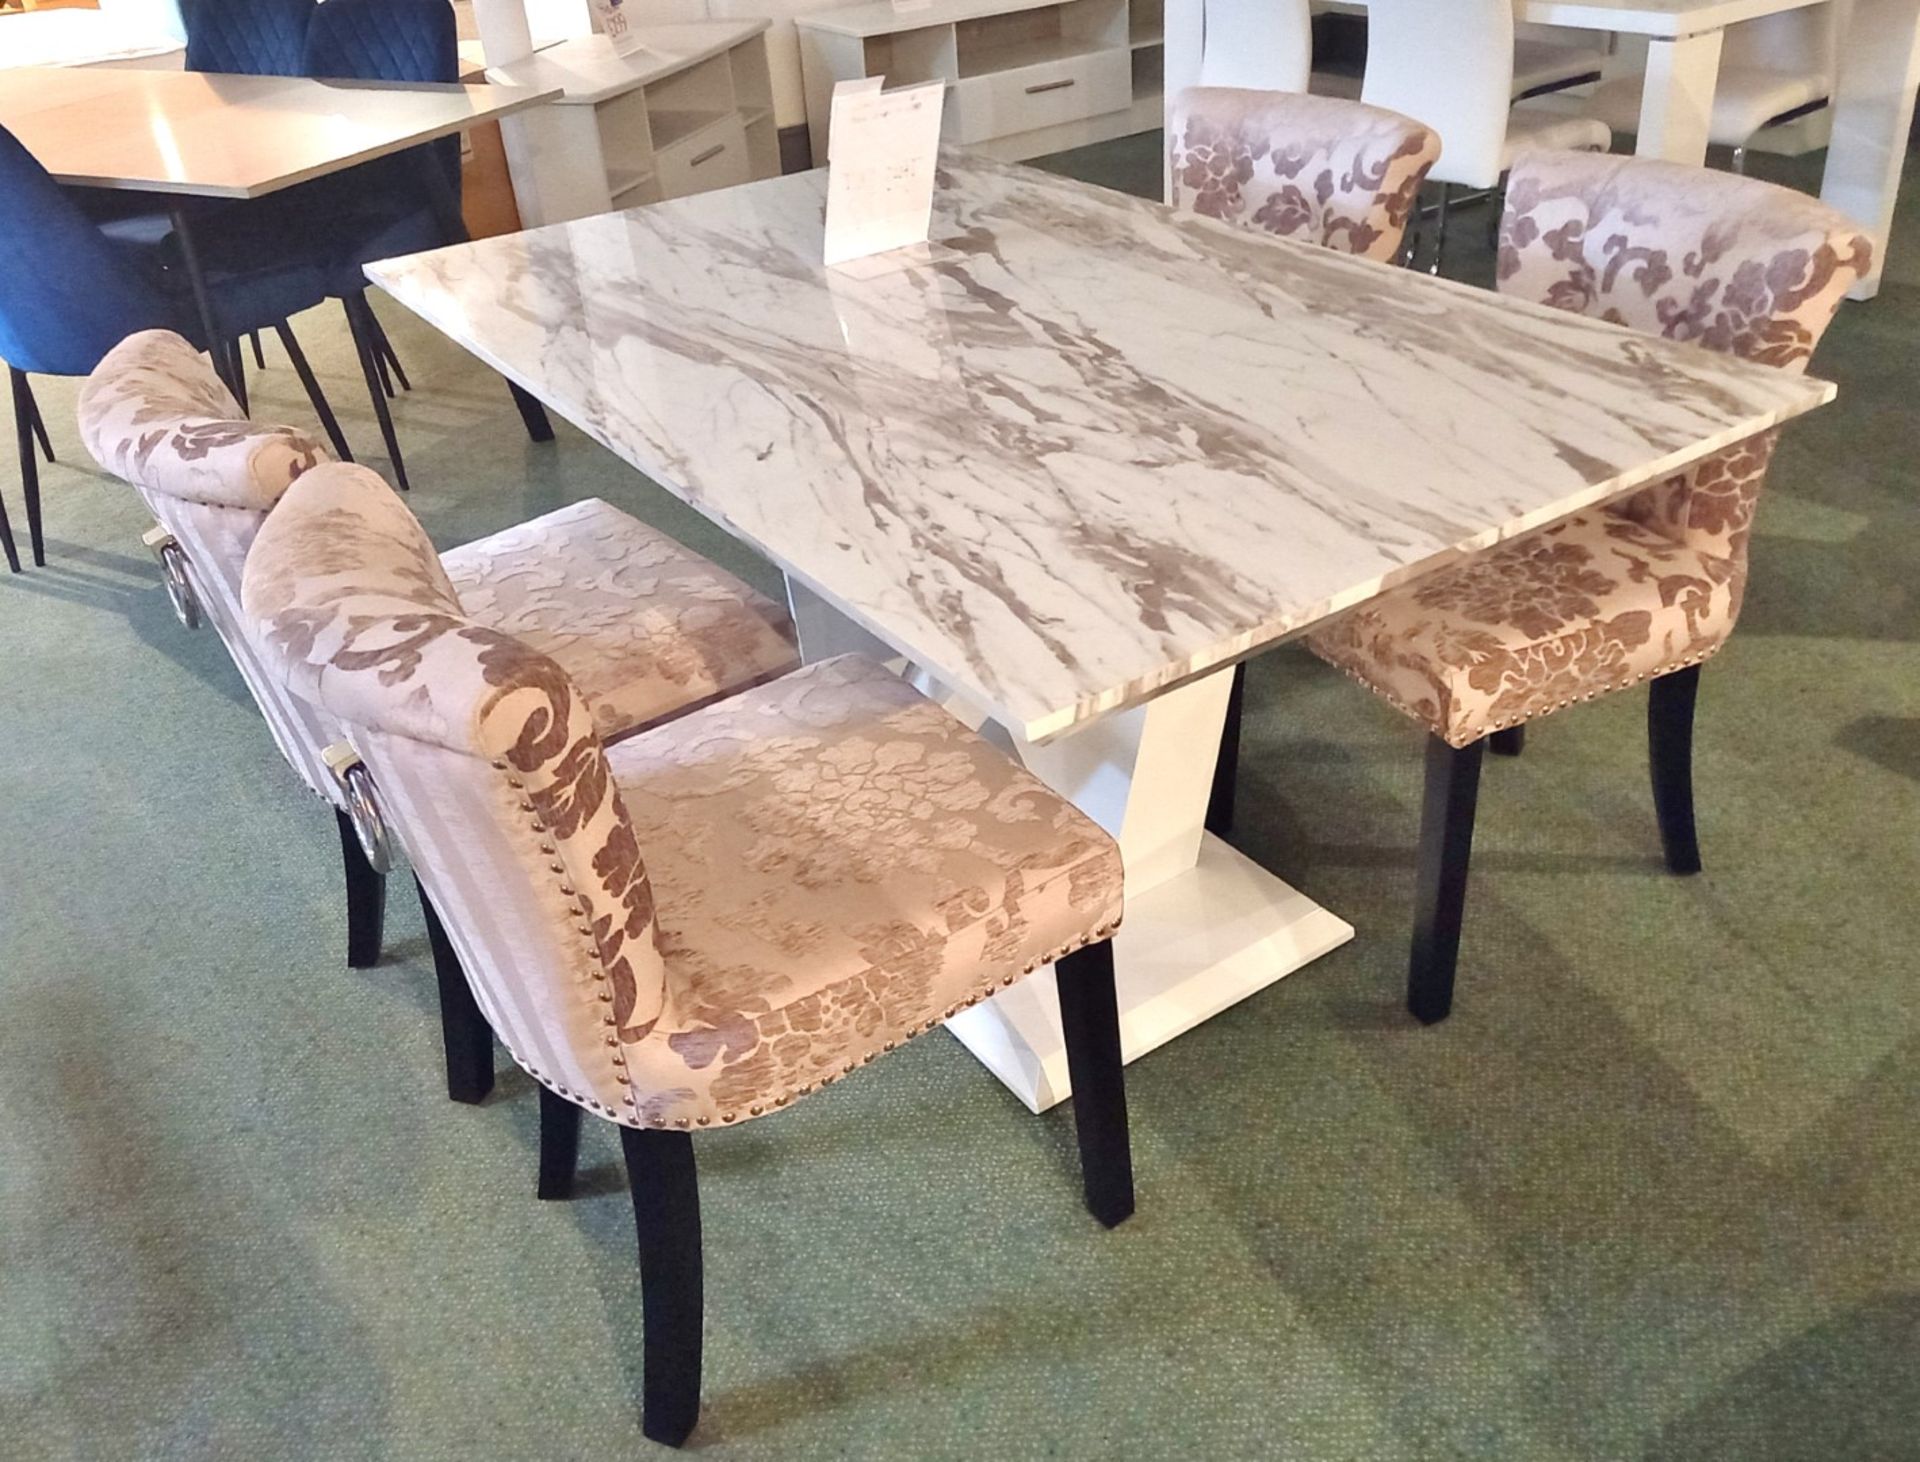 Saturn Medium Table & 4 Chairs (1500 x 900) Rrp. £799 - Image 2 of 7